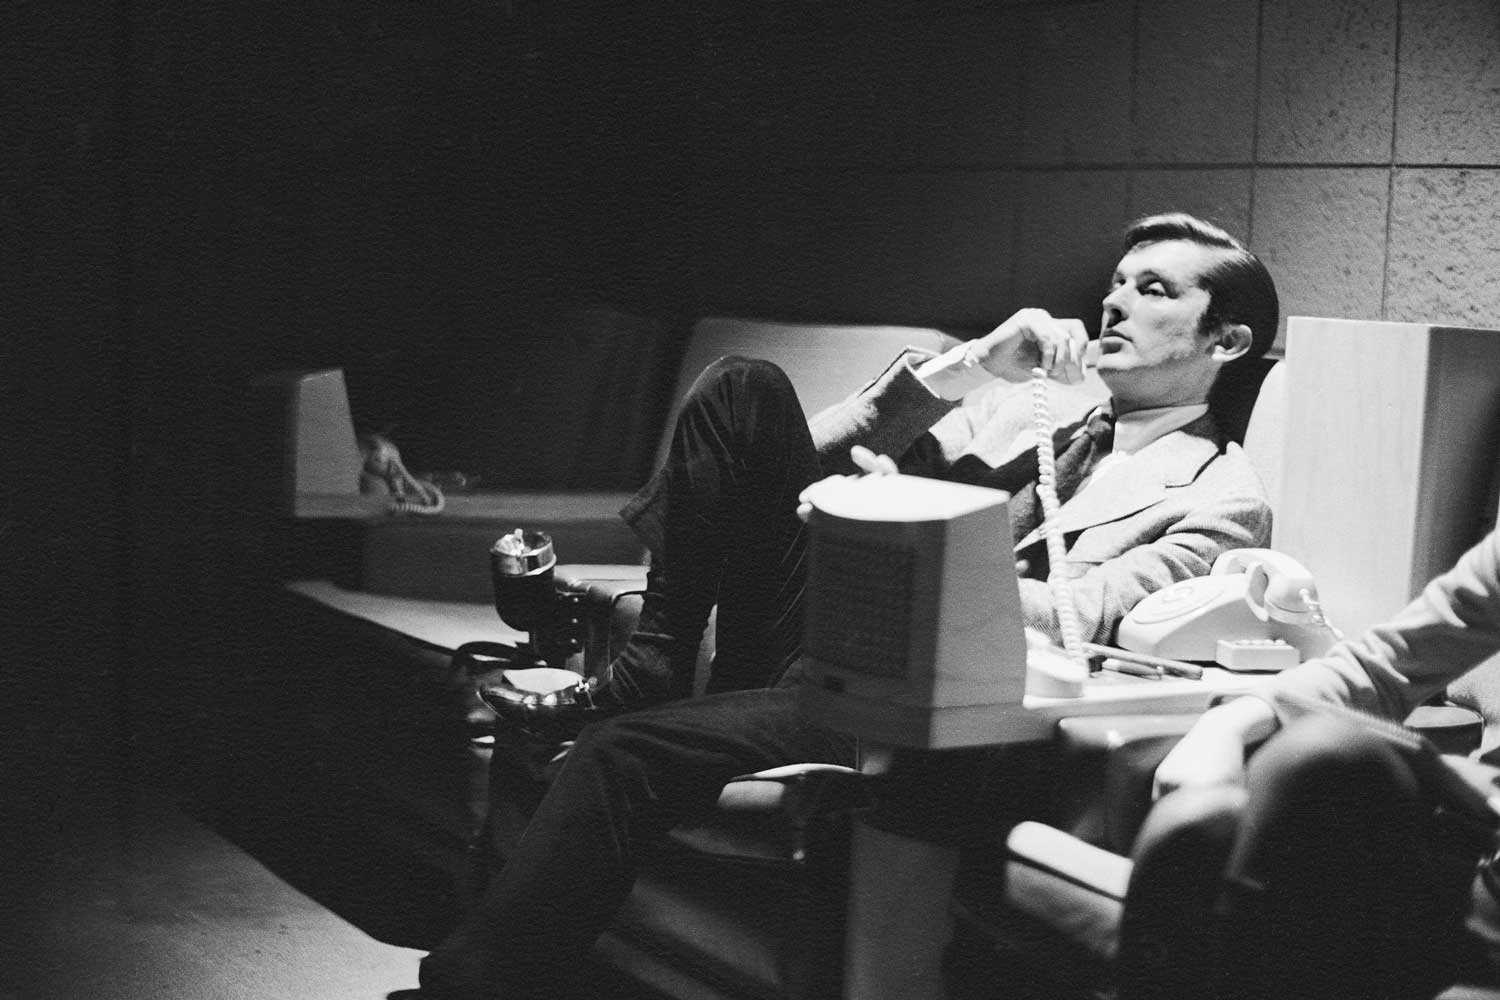 Robert Evans in a Hollywood screening room in 1968, two years after he was plucked from relative obscurity to run production at Paramount (Image: Alfred Eisenstaedt/The LIFE Picture Collection)